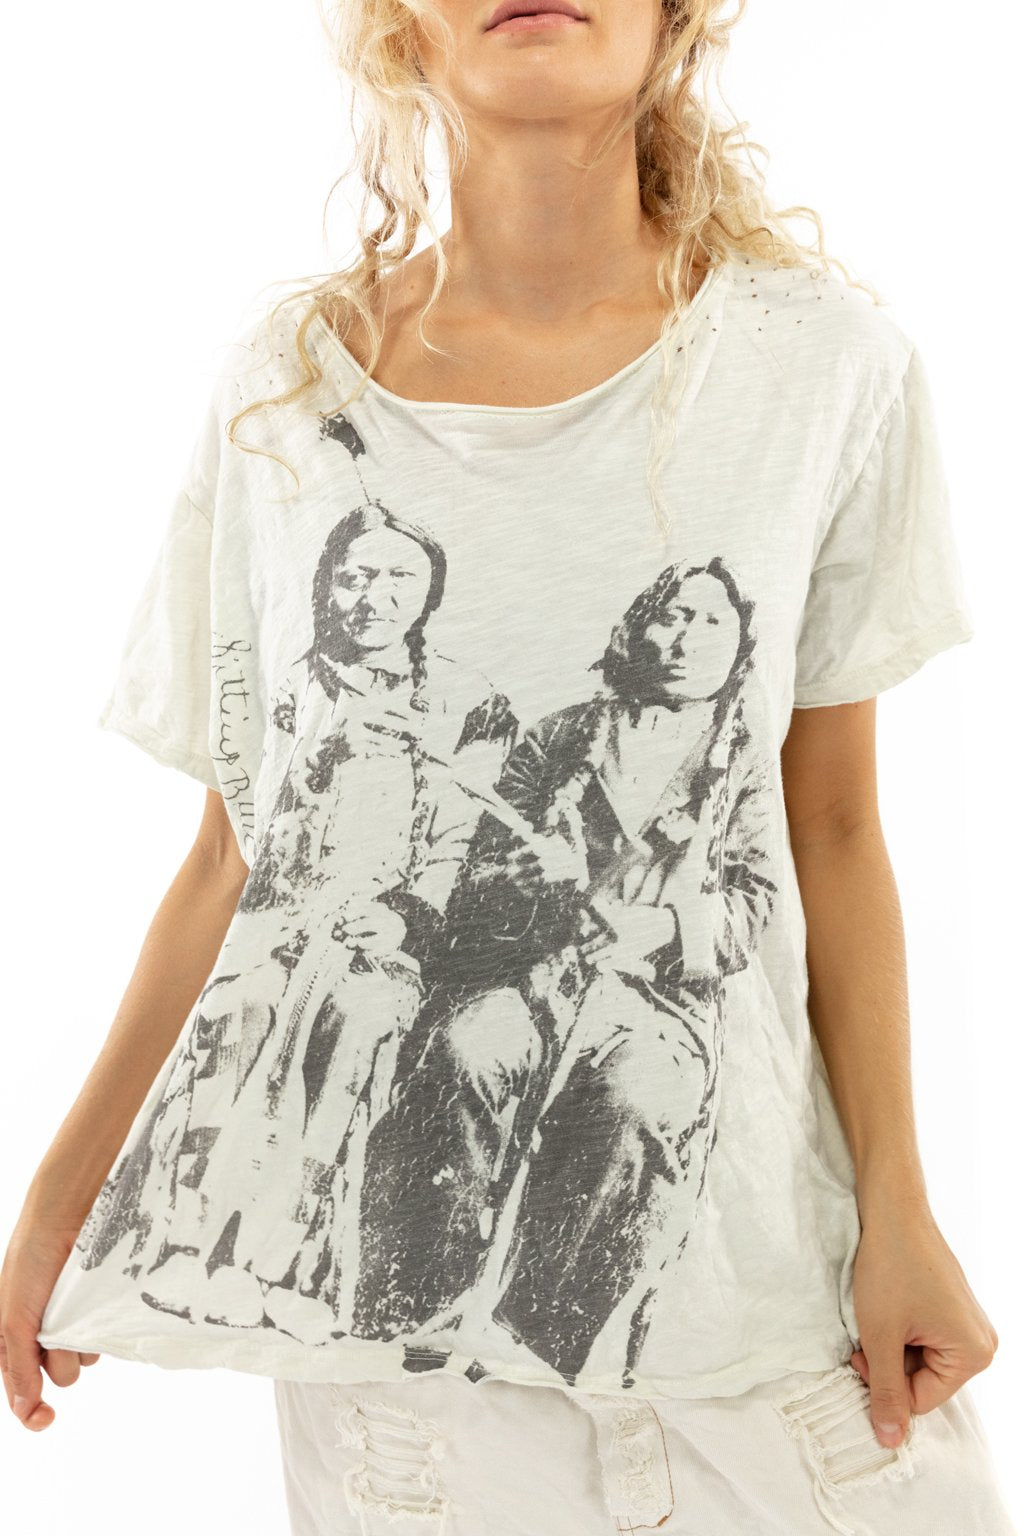 Magnolia Pearl Kindred Spirit T Top 1090